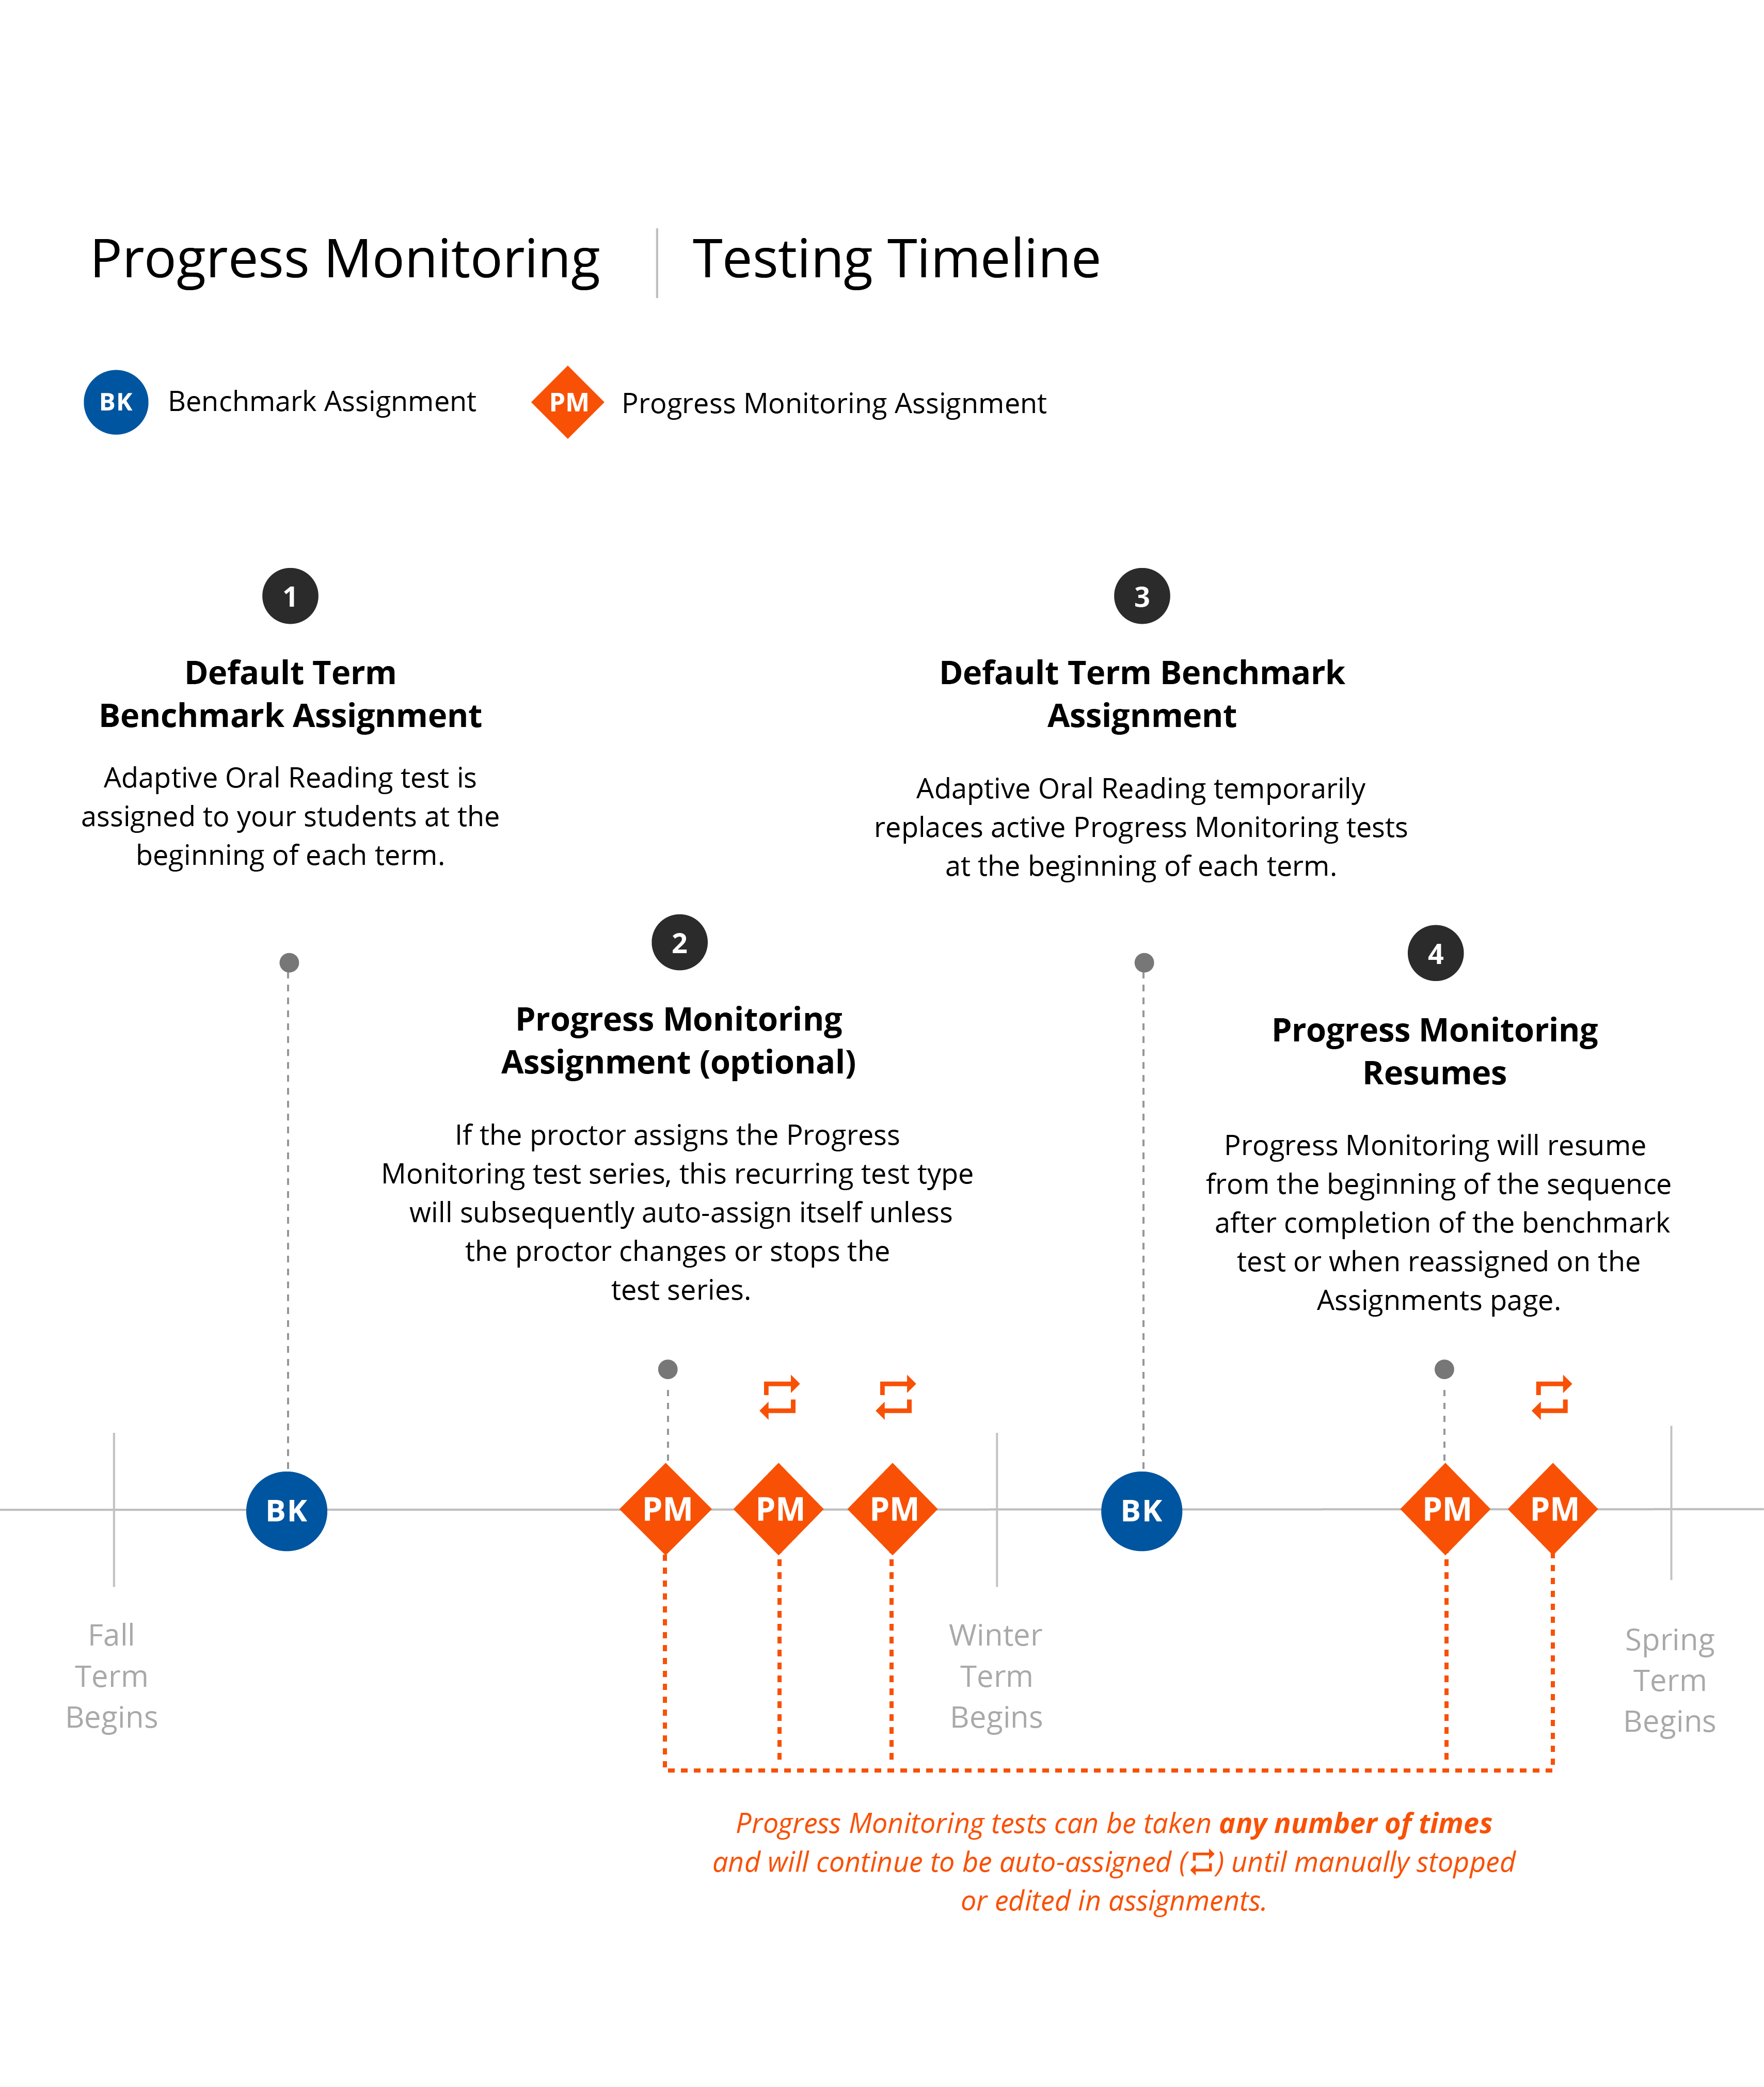 Graphic showing that Progress Monitoring tests can be taken any number of times between fall and spring terms and will continue to be automatically assigned until manually stopped or edited assignments